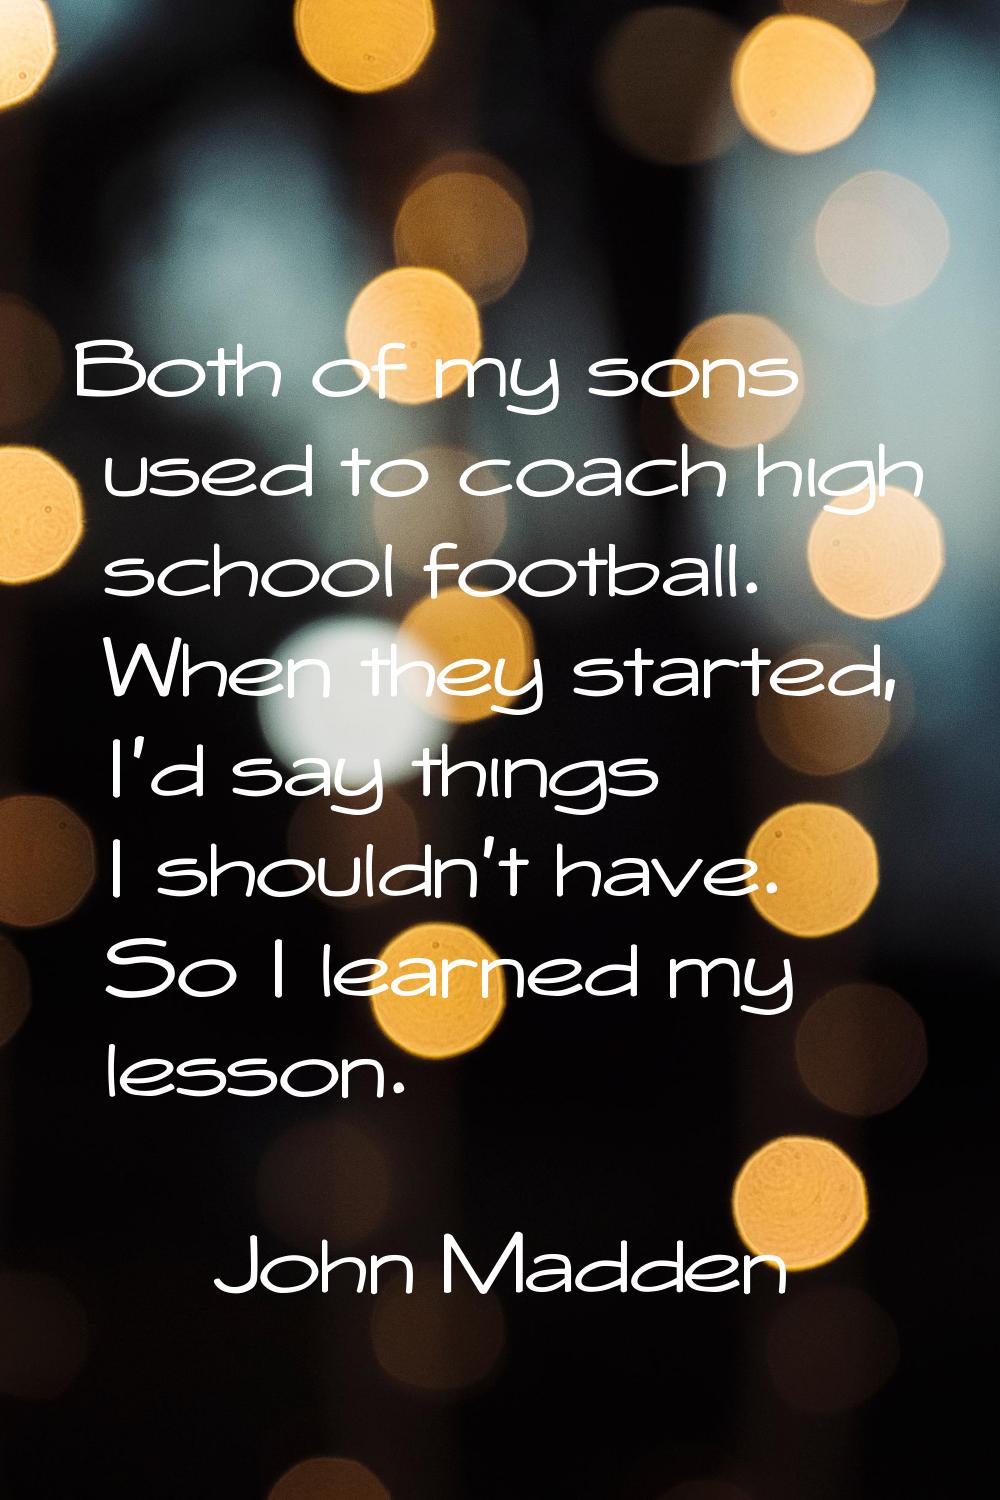 Both of my sons used to coach high school football. When they started, I'd say things I shouldn't h